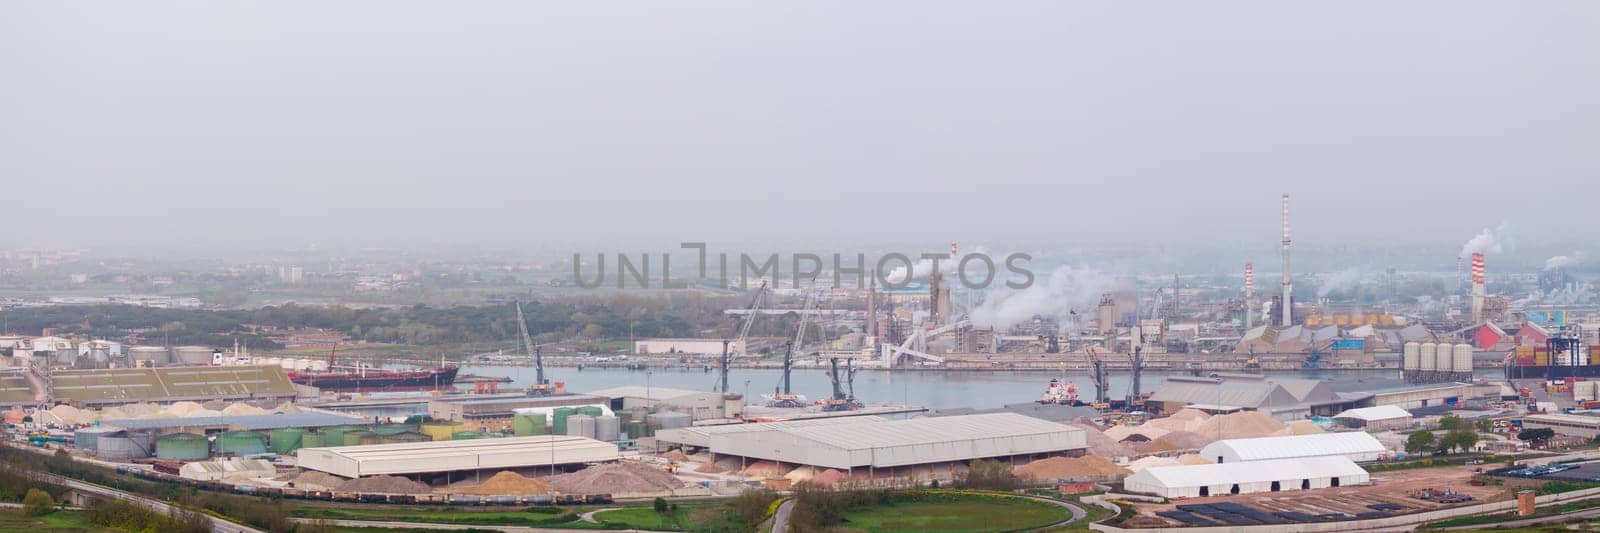 Panorama of hydrocarbon refinery and liquefied natural gas tanks at overcast day by Robertobinetti70